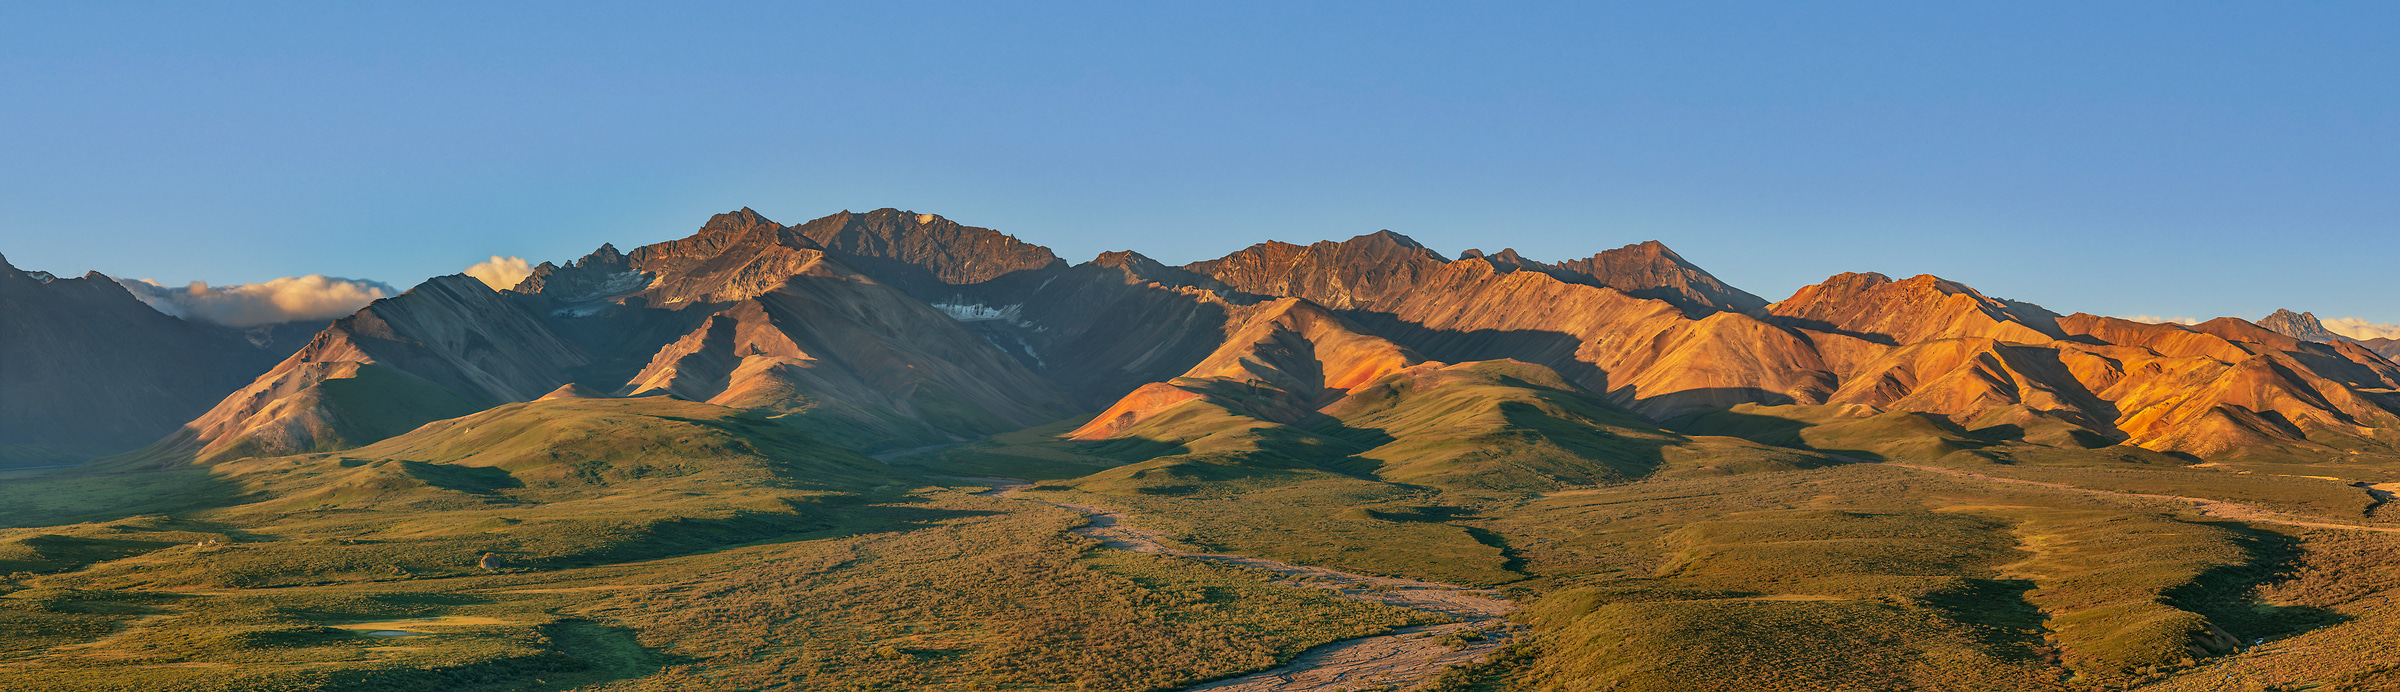 549 megapixels! A very high resolution, large-format VAST photo print of hills and a mountain ridgeline at sunrise; landscape photograph created by John Freeman in Polychrome Overlook, Denali National Park, Alaska